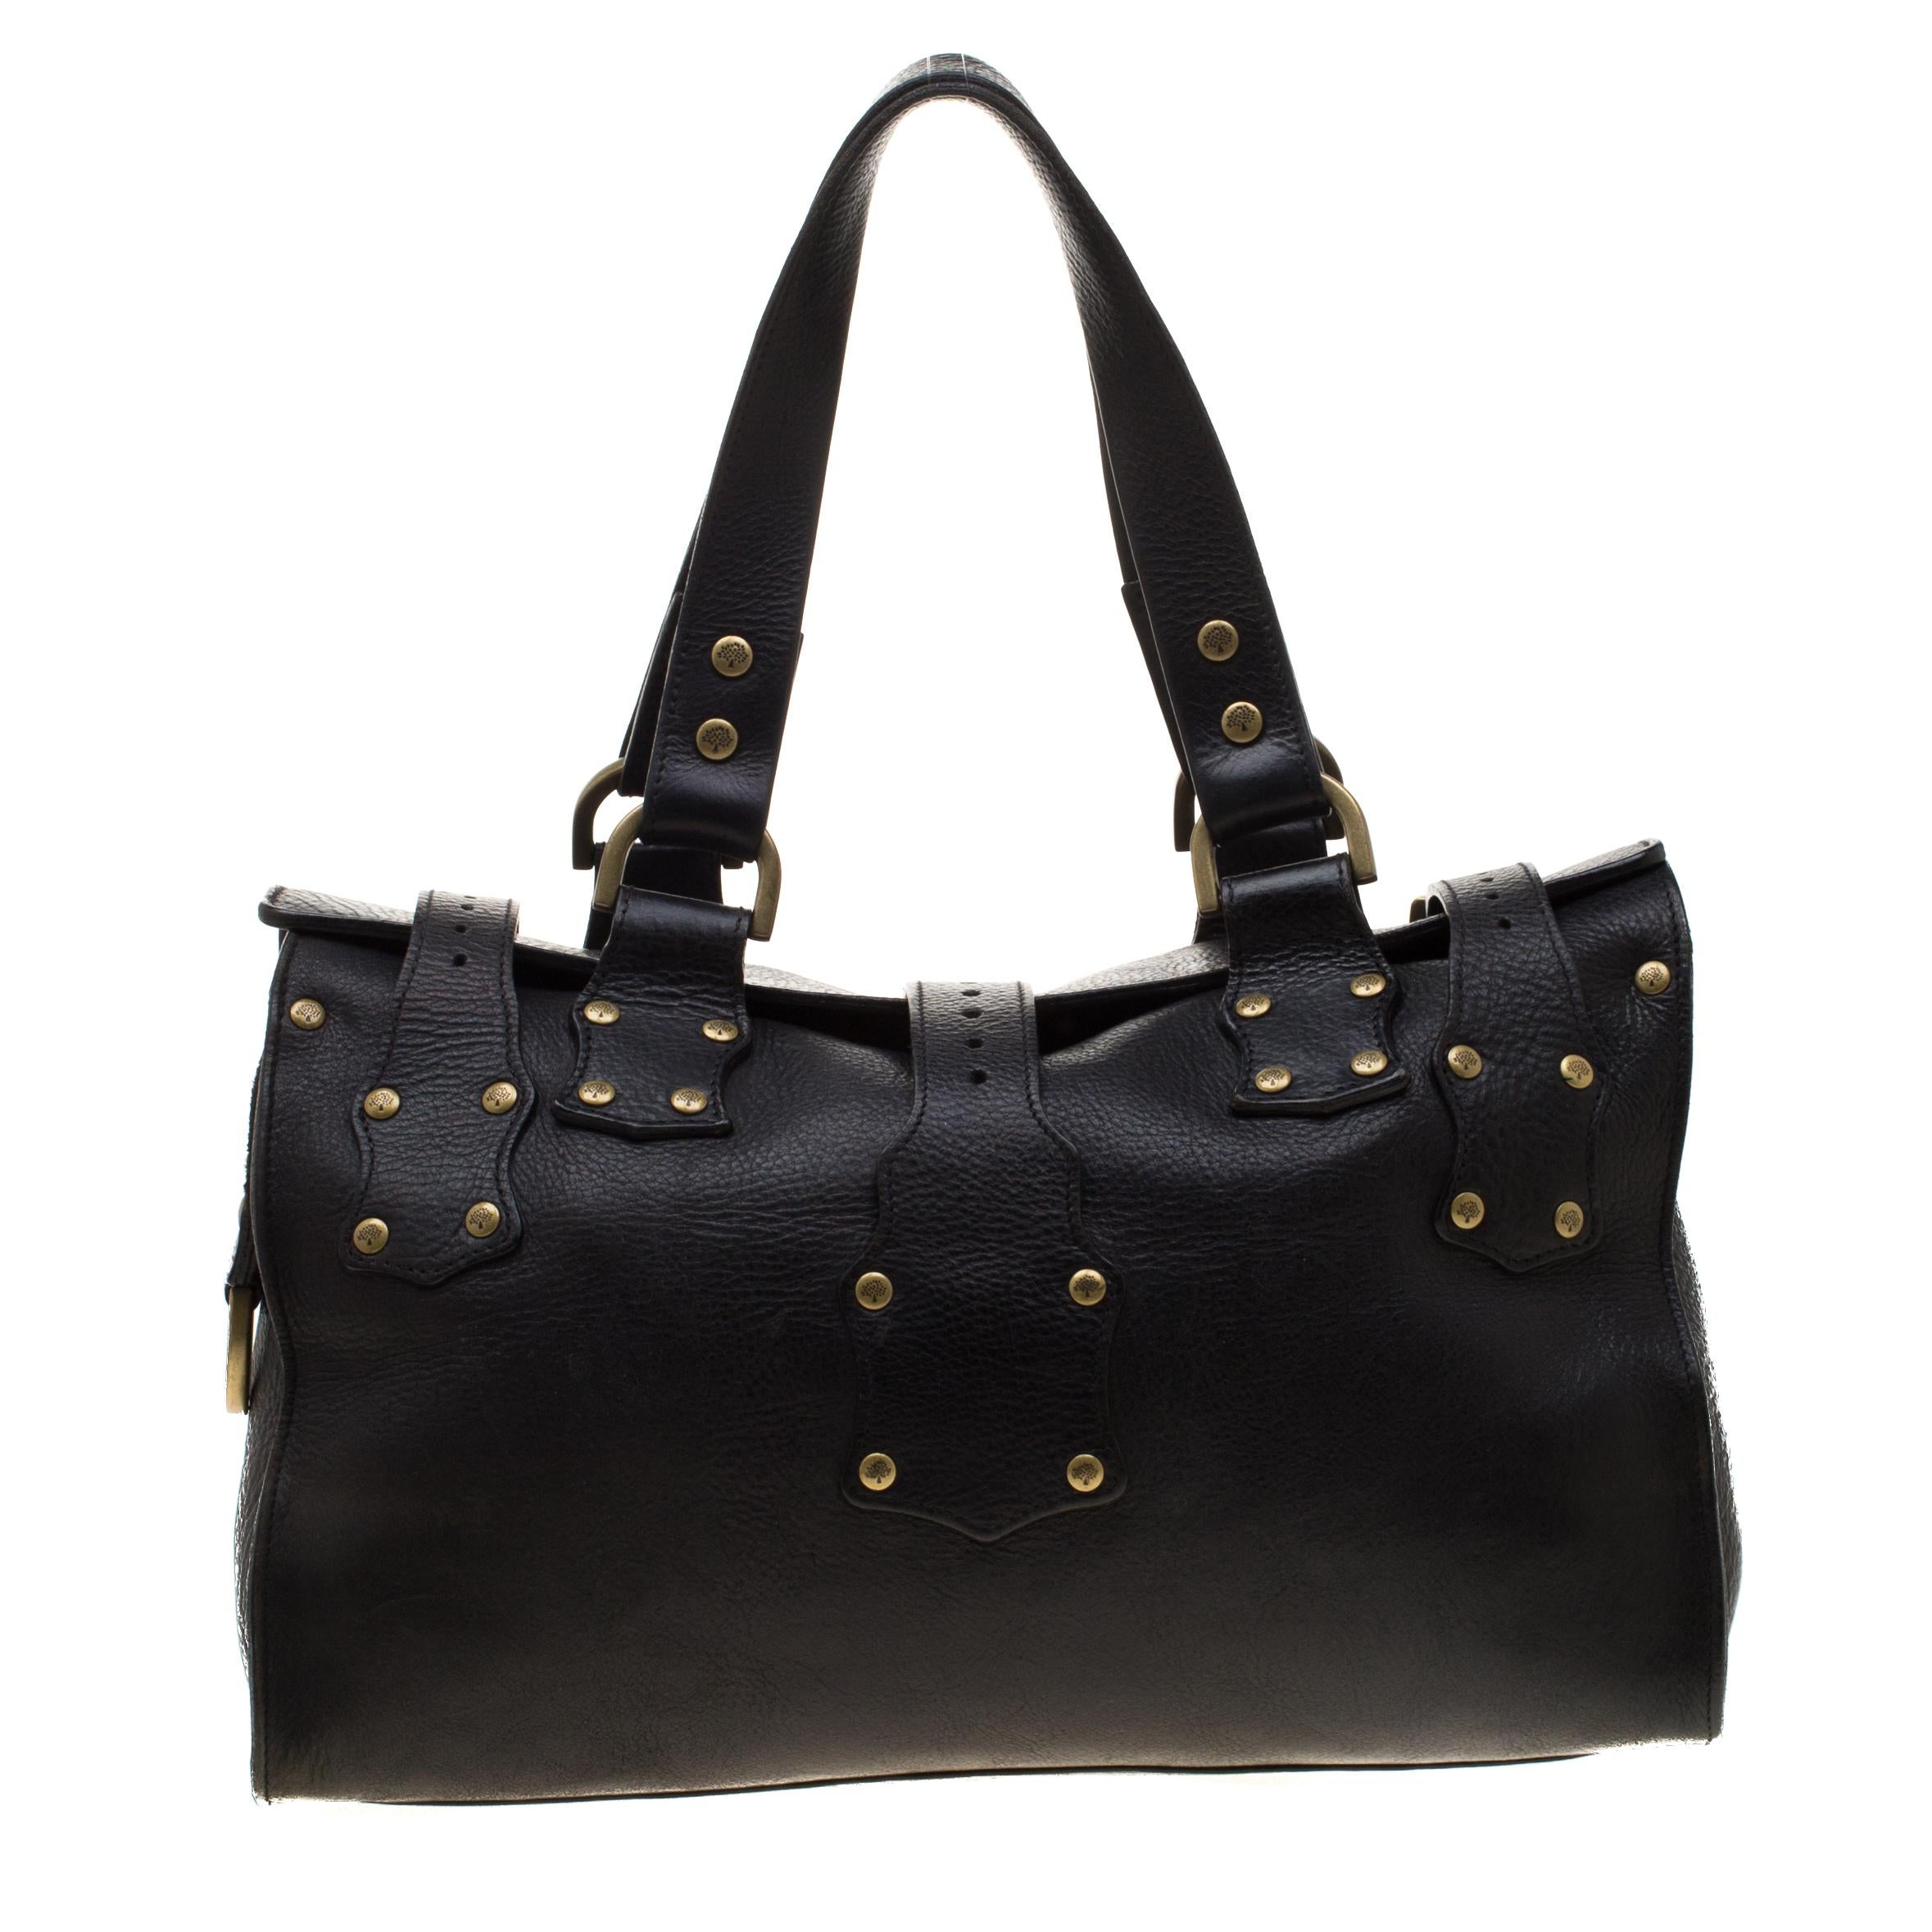 This lovely Mulberry design has been crafted from leather and designed with front pockets and buckles. The black bag has two handles and a spacious suede interior to carry all your essentials.

Includes: Original Dustbag

